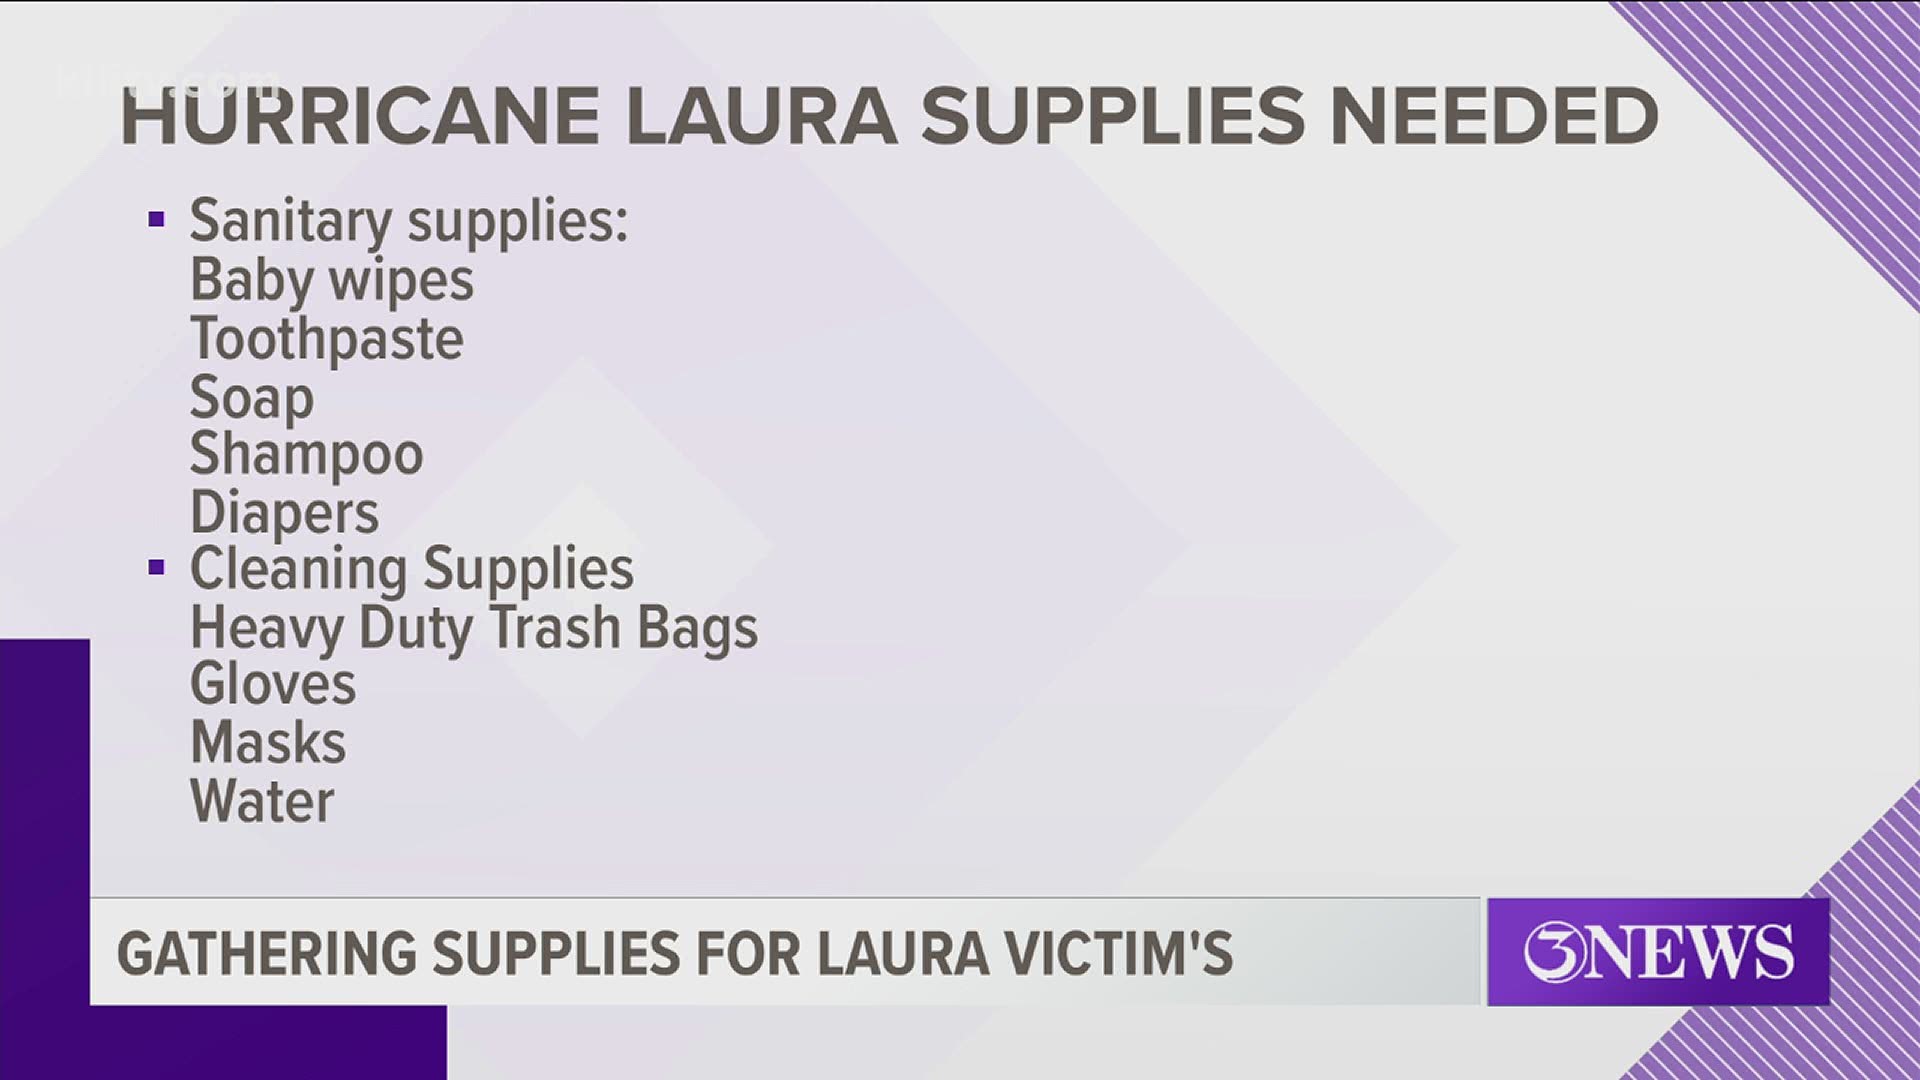 Several businesses in the Rockport-Fulton area will be collecting items to donate to people who were hit hard by Hurricane Laura.